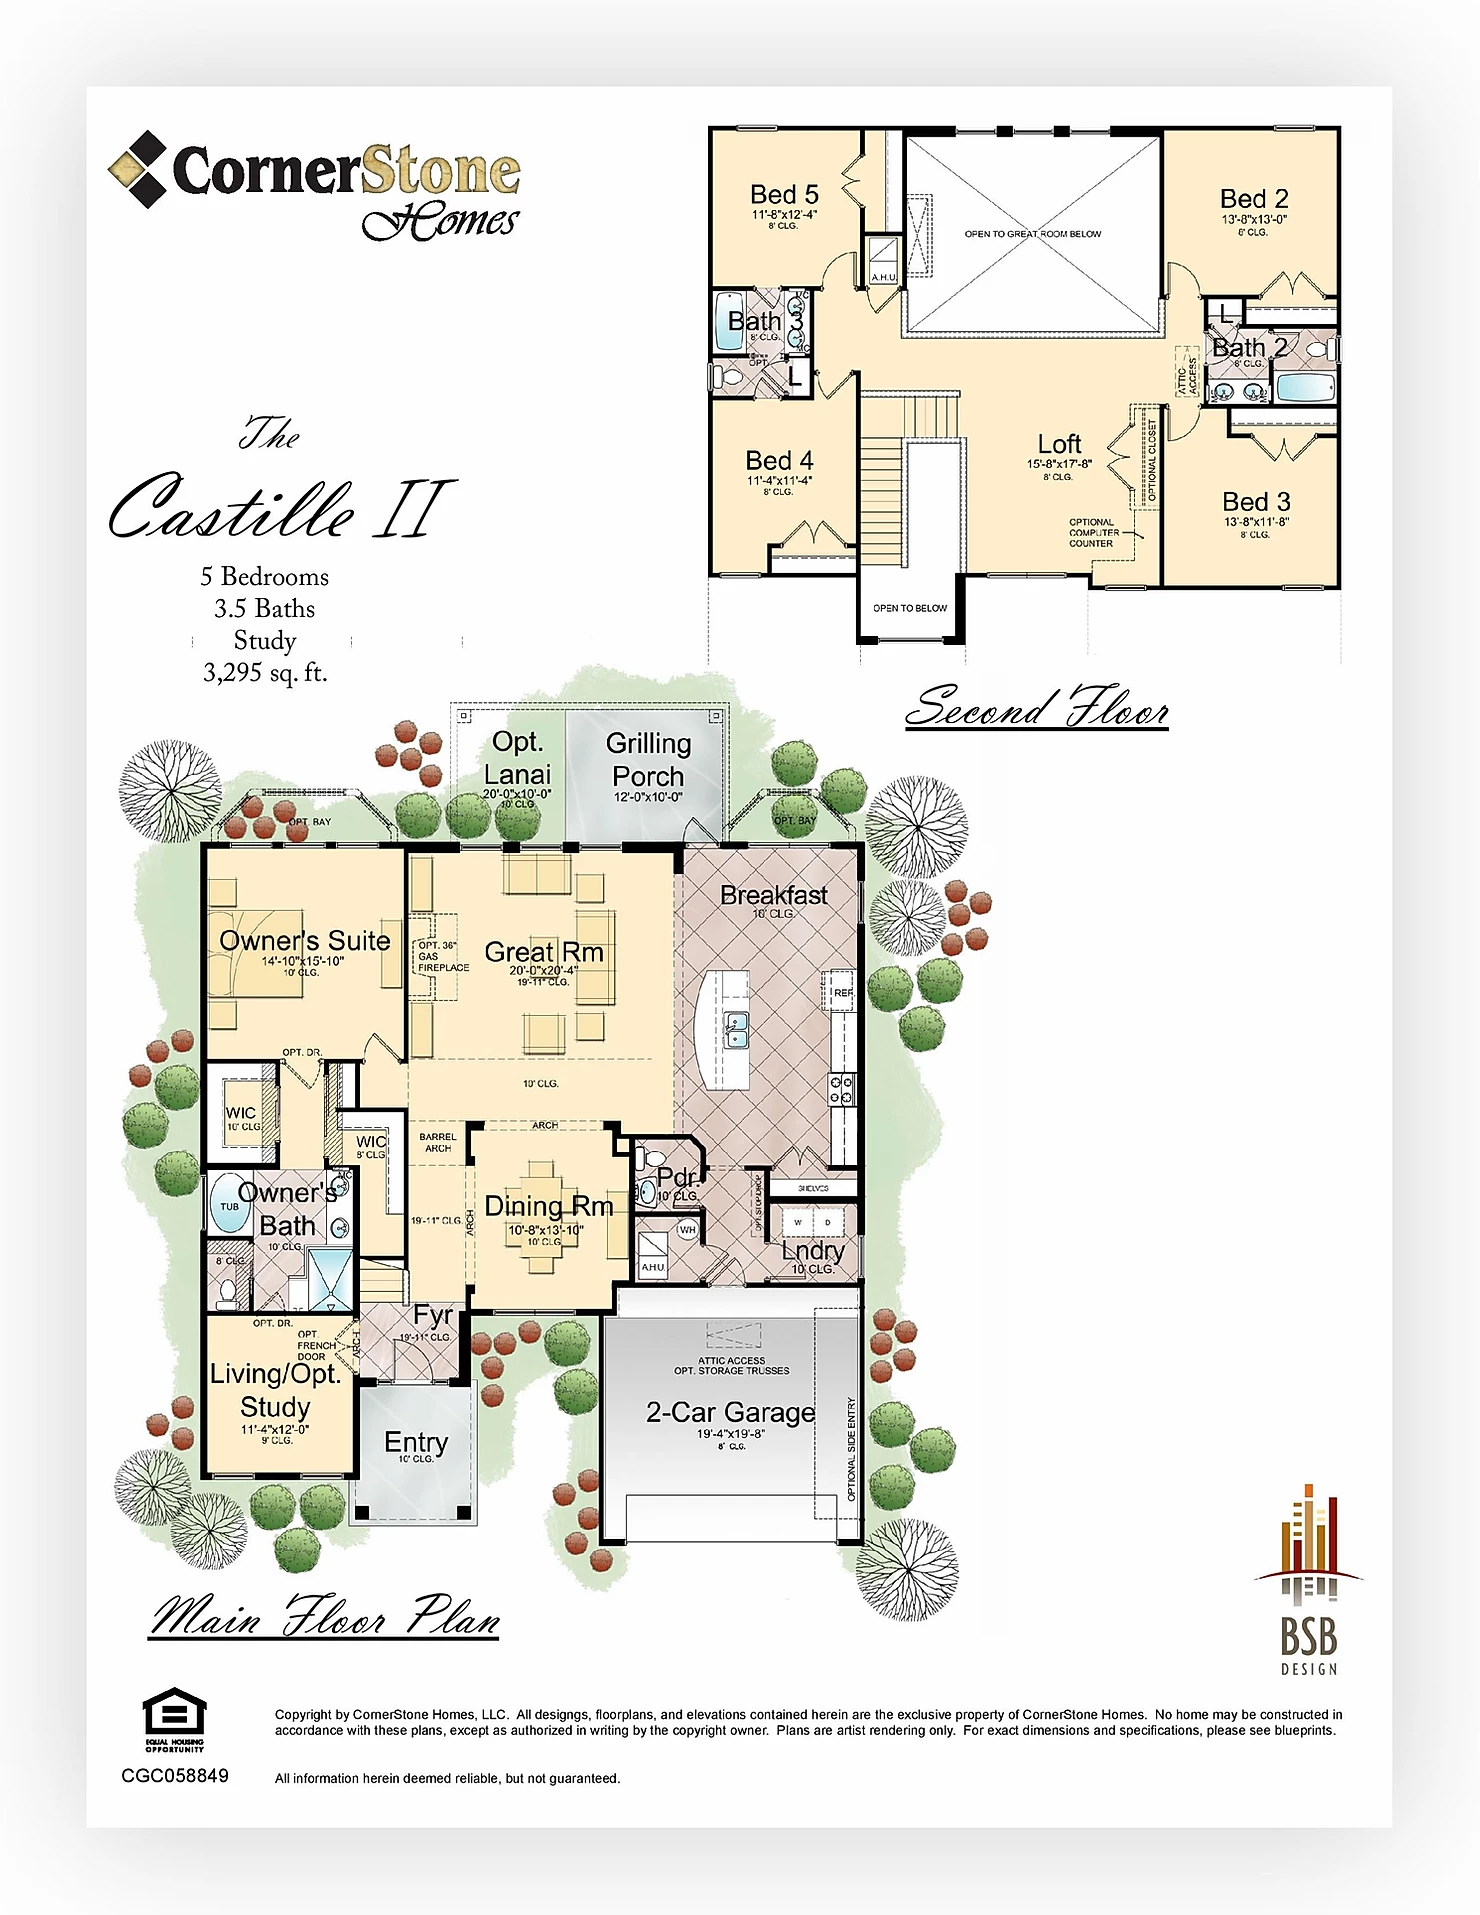 Detailed architectural floorplan of The Castille II by Cornerstone Homes featuring a spacious two-story layout with 5 bedrooms, 3.5 baths, and luxurious amenities for sophisticated living.